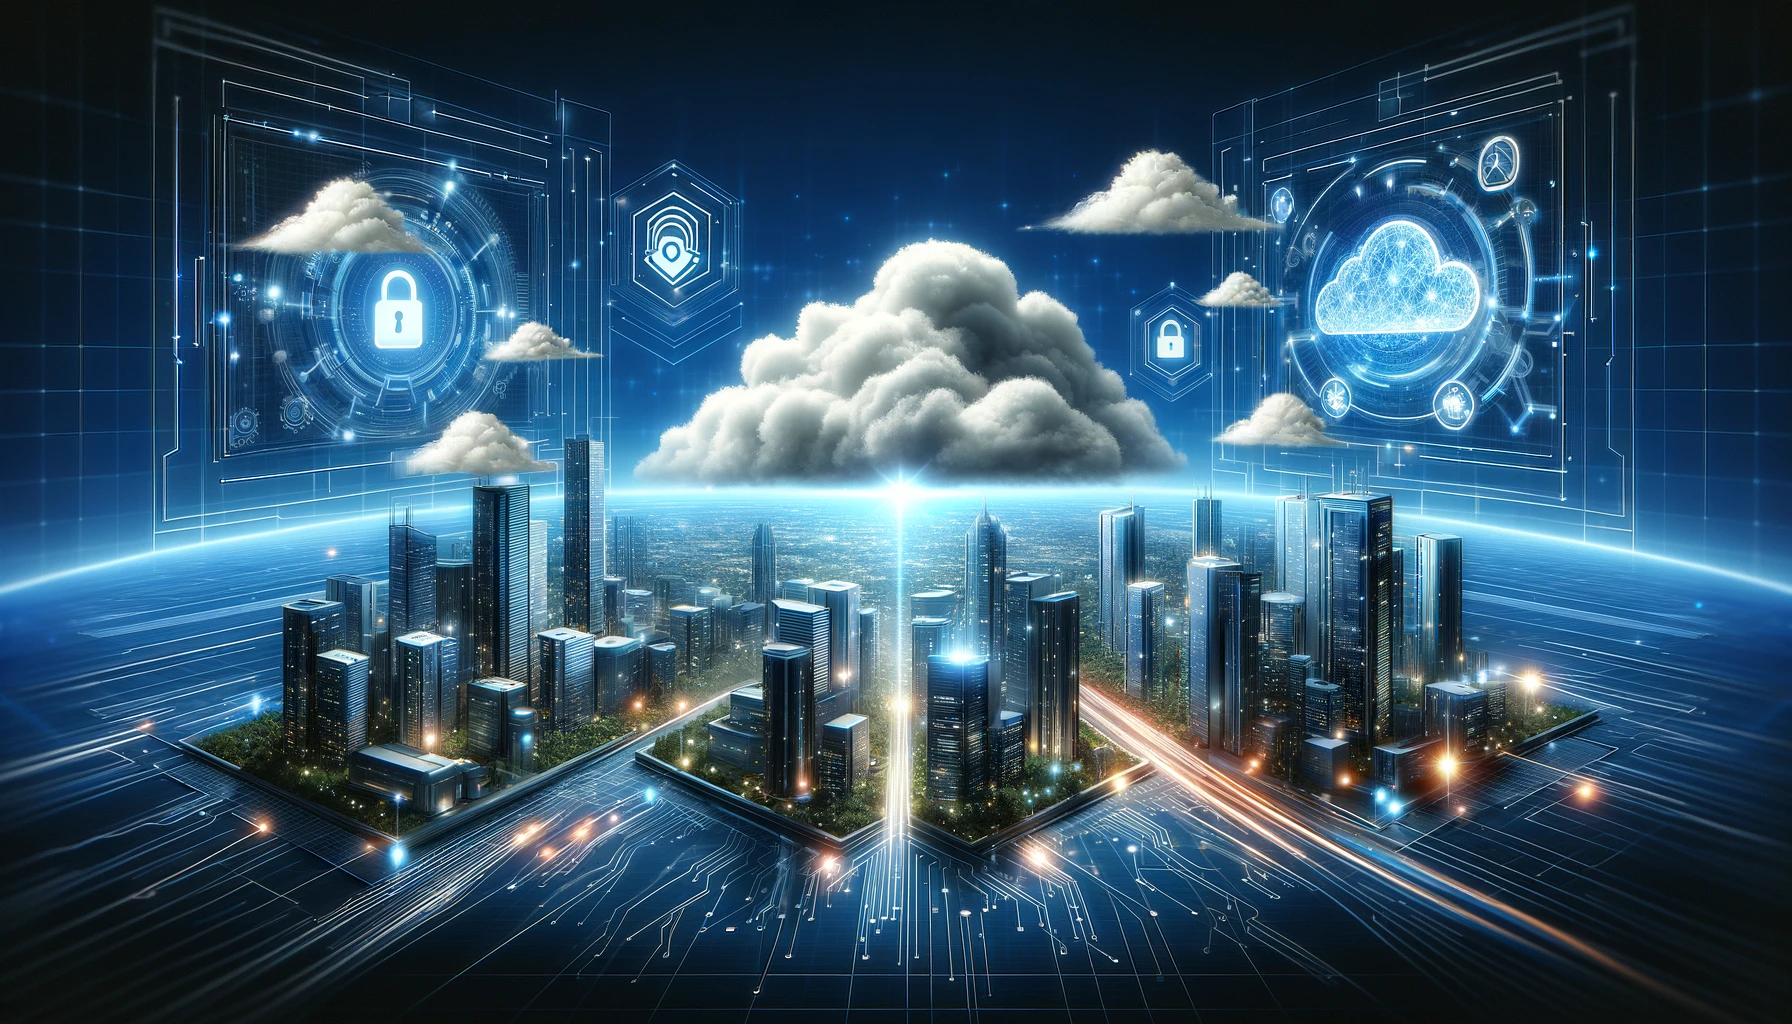 Futuristic digital landscape symbolizing Azure Entra Private Access and cloud security, featuring technology structures and secure network connections in shades of blue and silver.